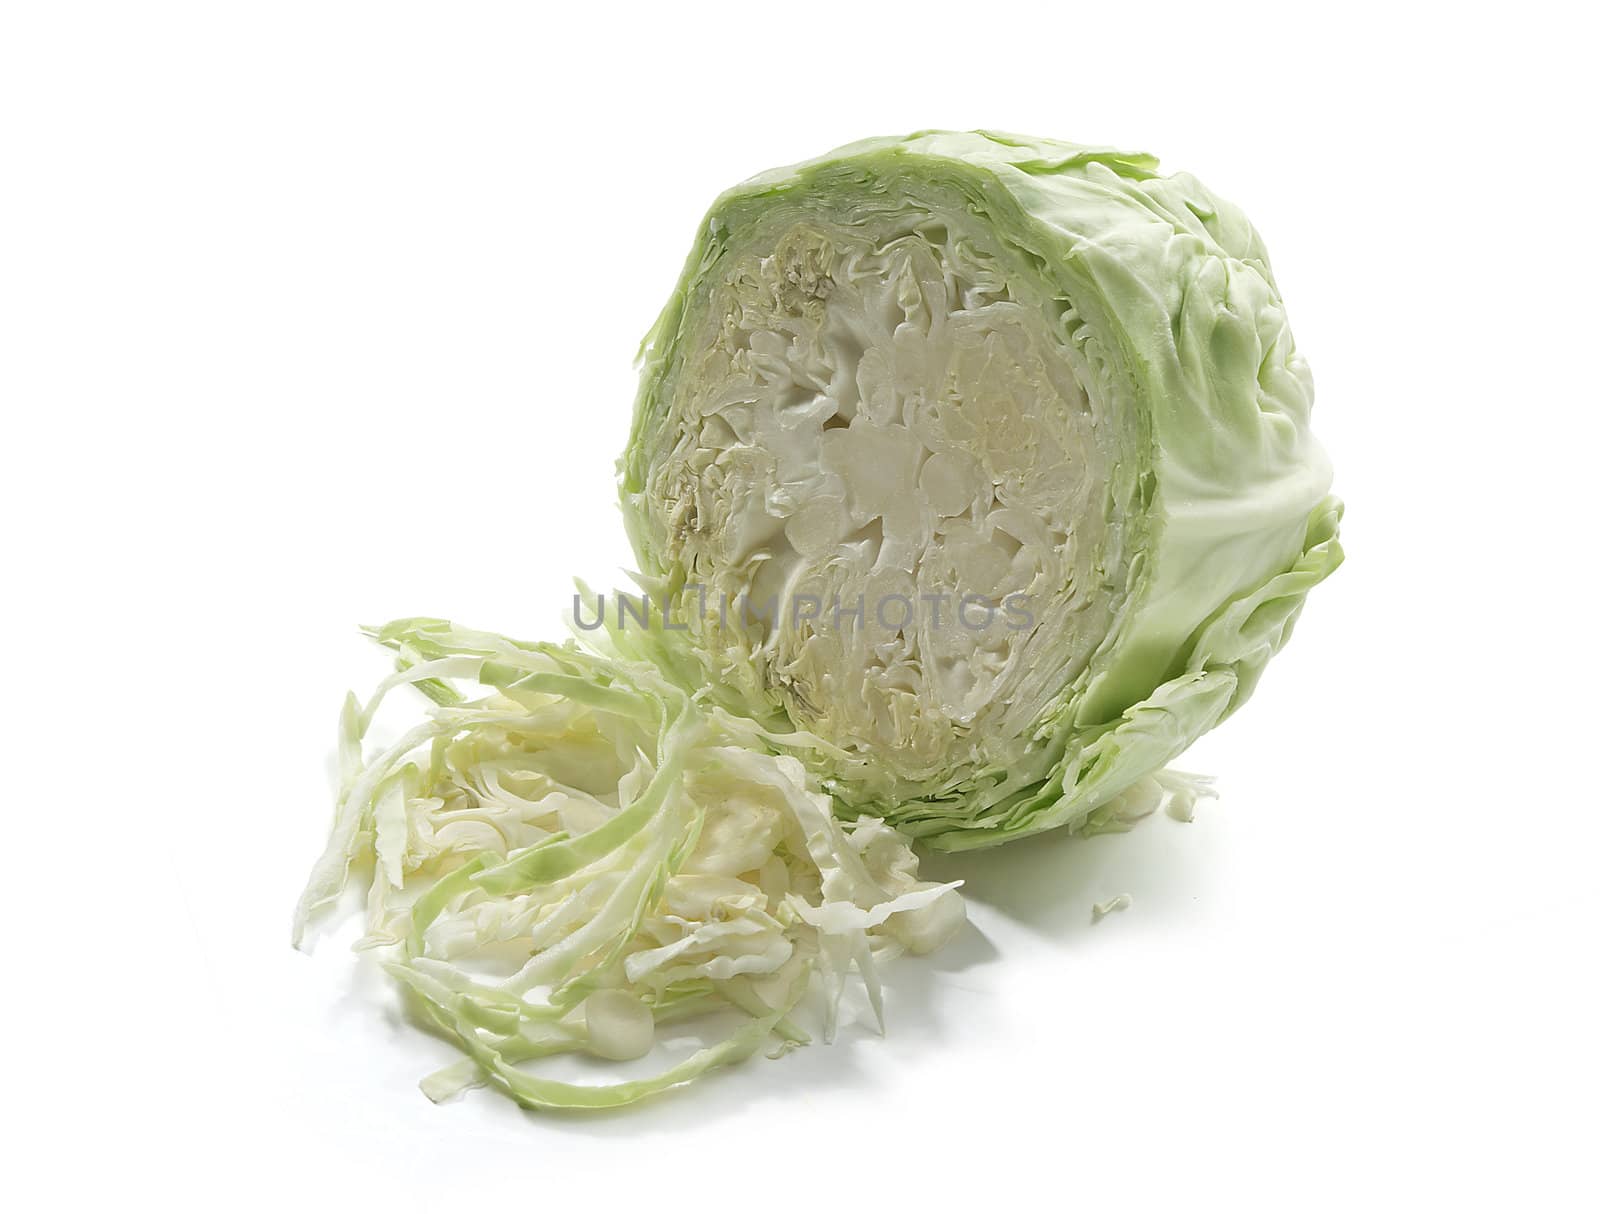 Cabbage by Angorius